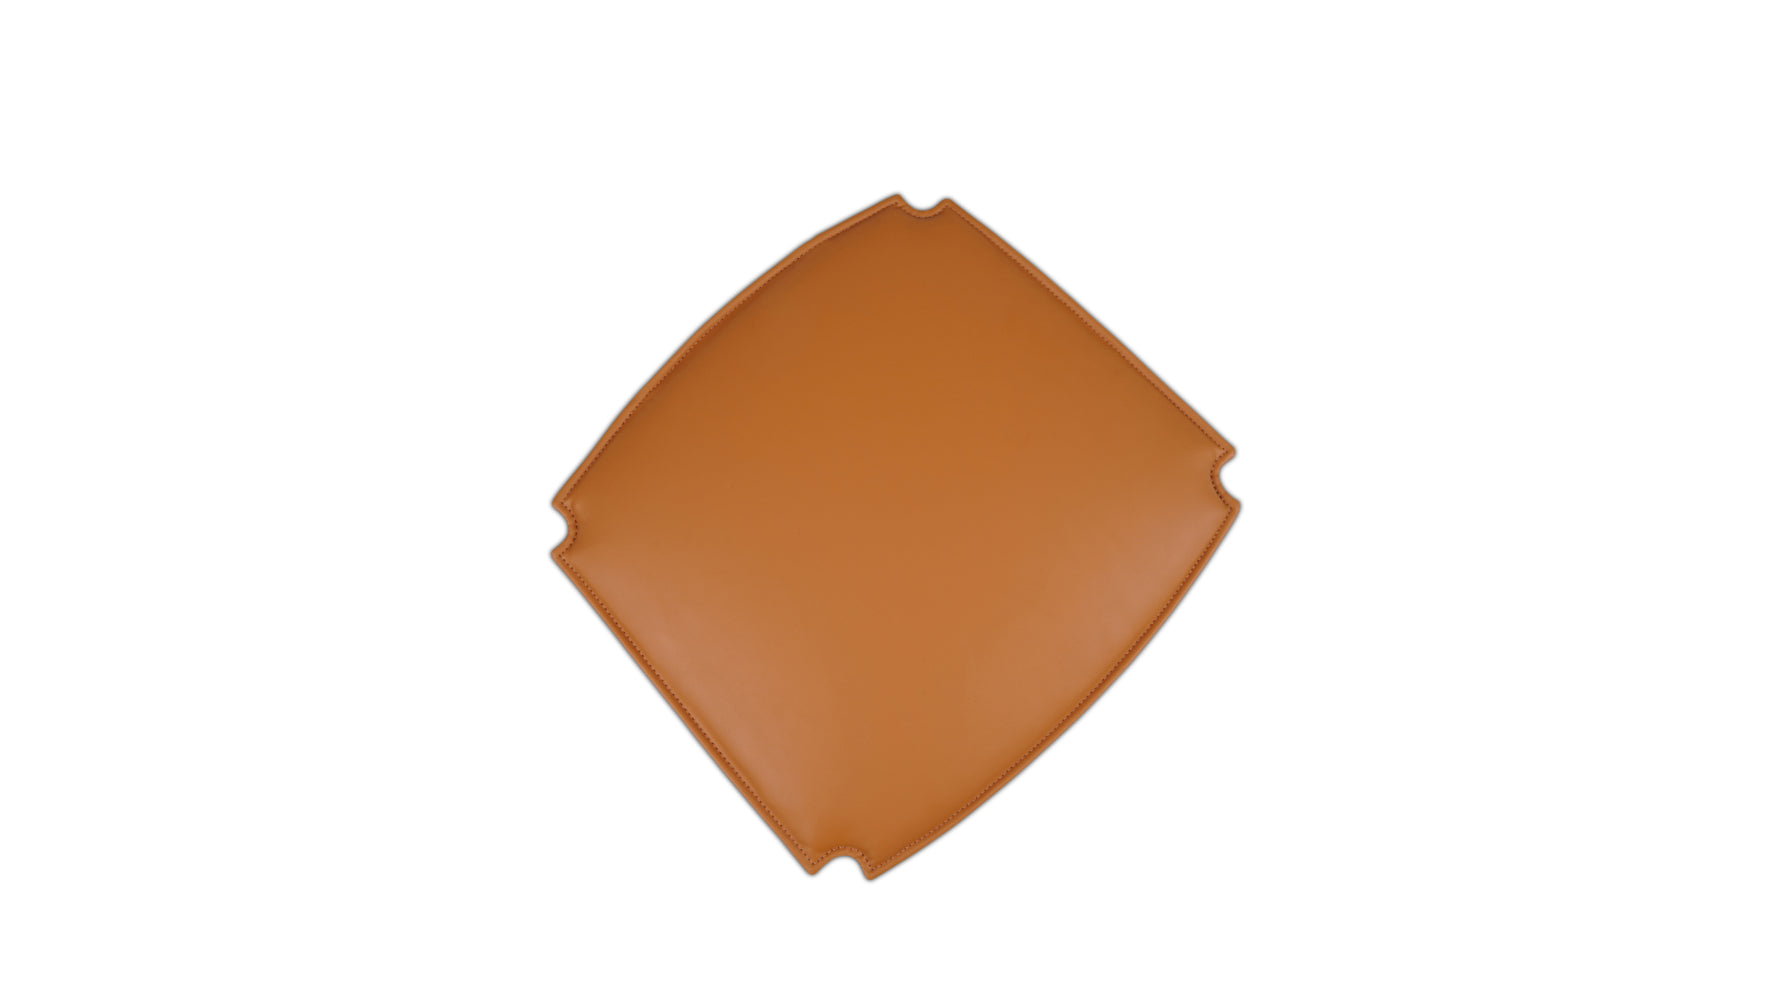 Seat Cushion - Tuck In Dining Chair, Cognac - Image 2